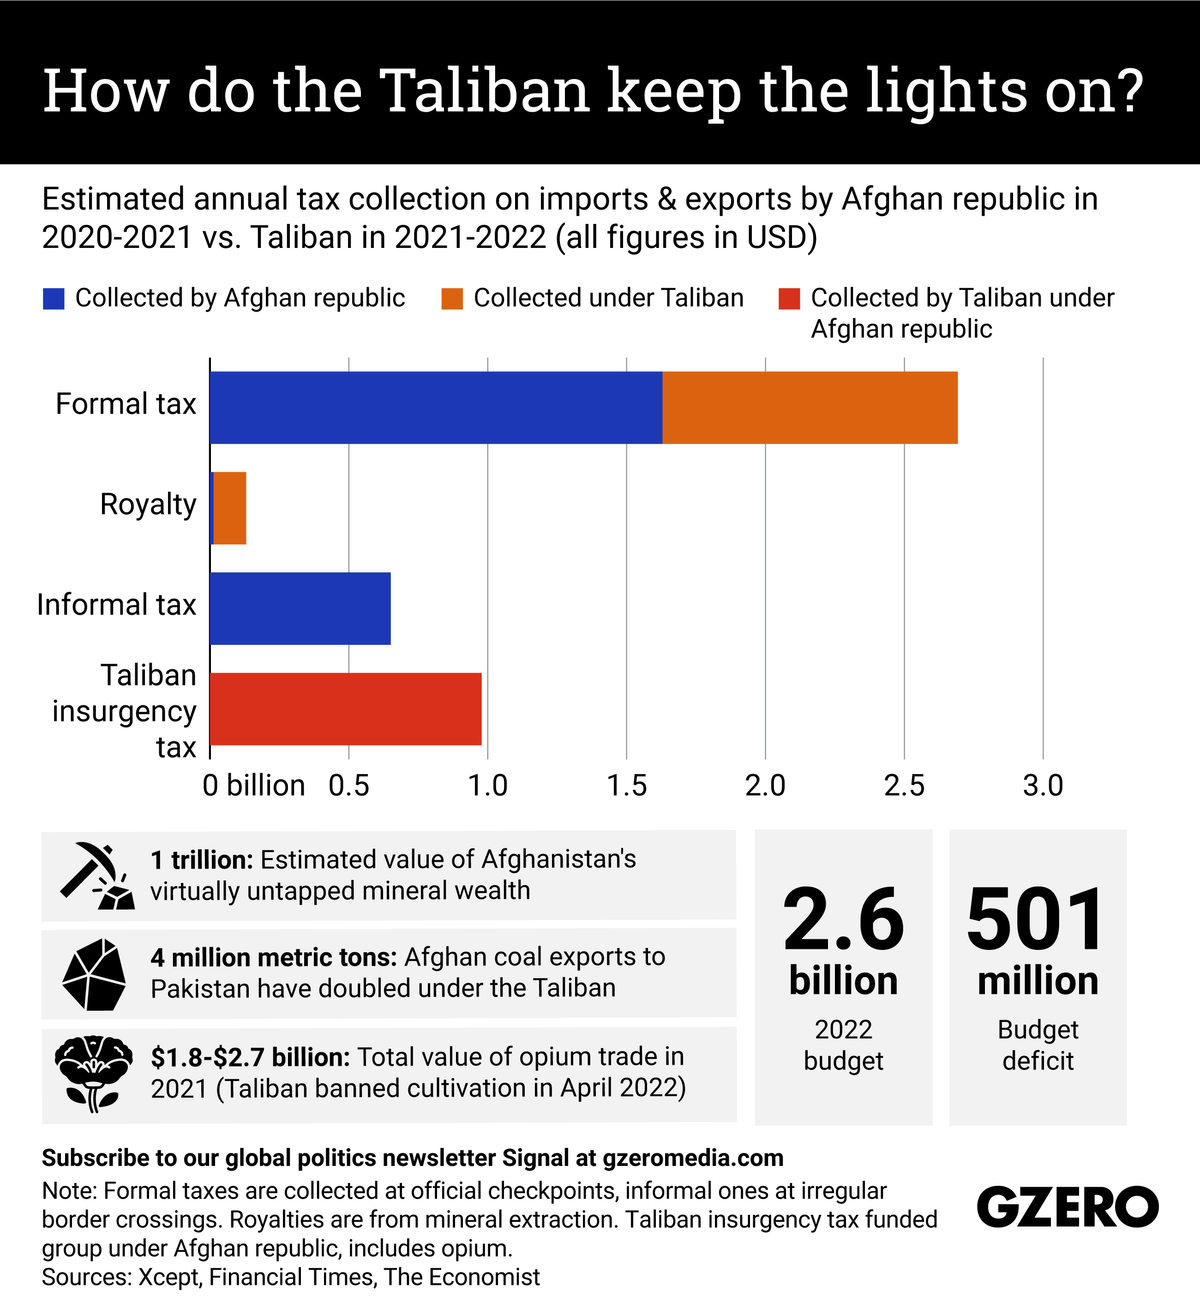 The Graphic Truth: How do the Taliban keep the lights on?